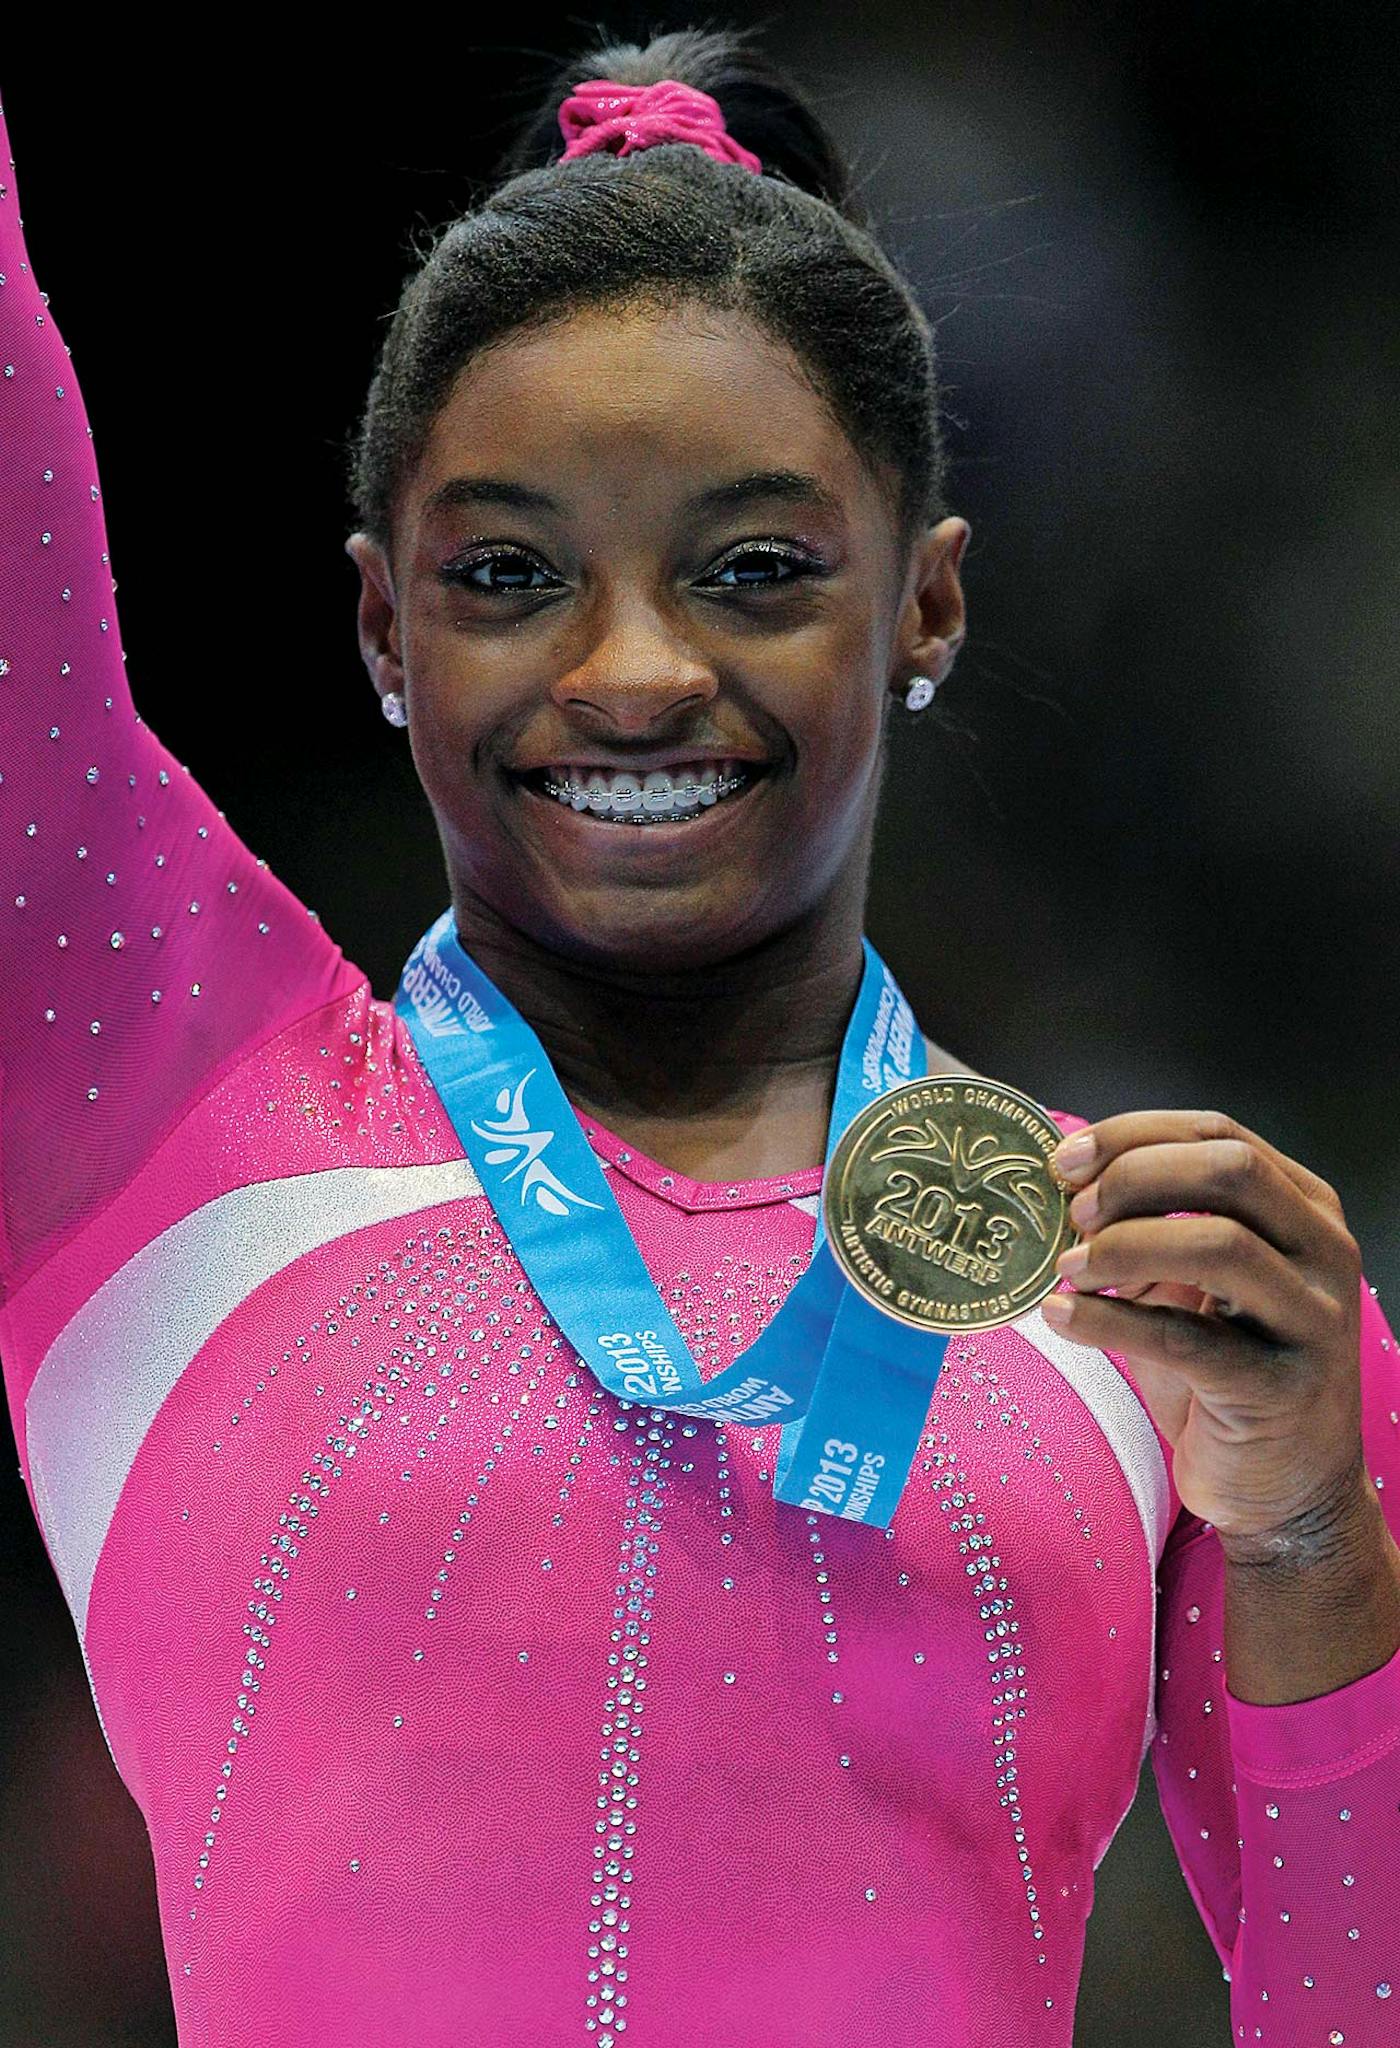 Meet Simone Biles, the Olympic Gymnast From Spring